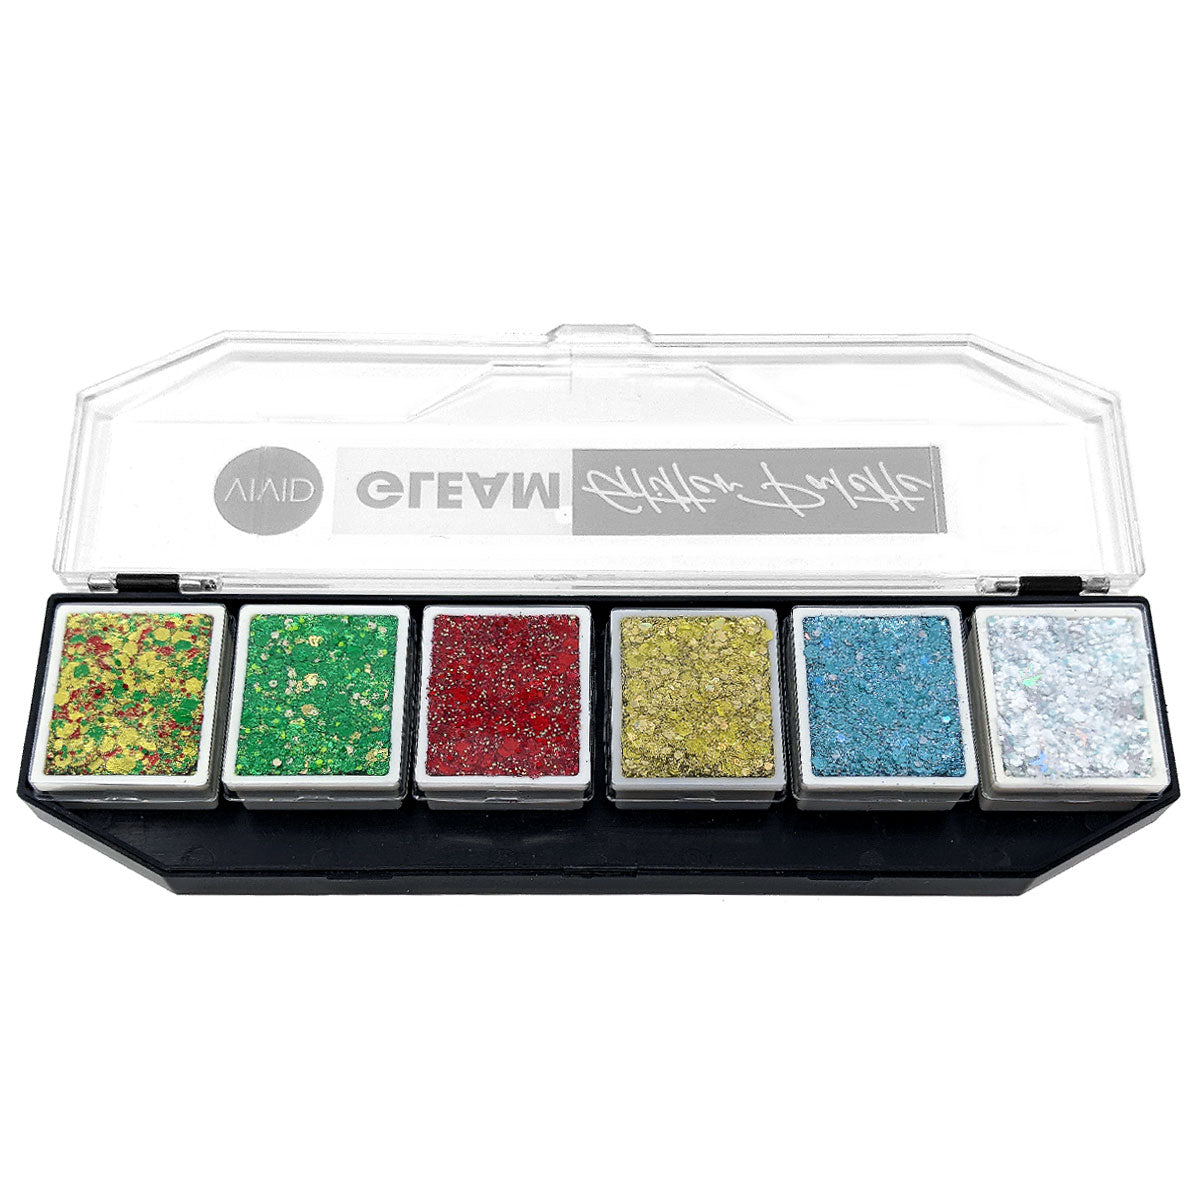 Christmas Miracle Gleam Glitter Cream Palette Limited Edition